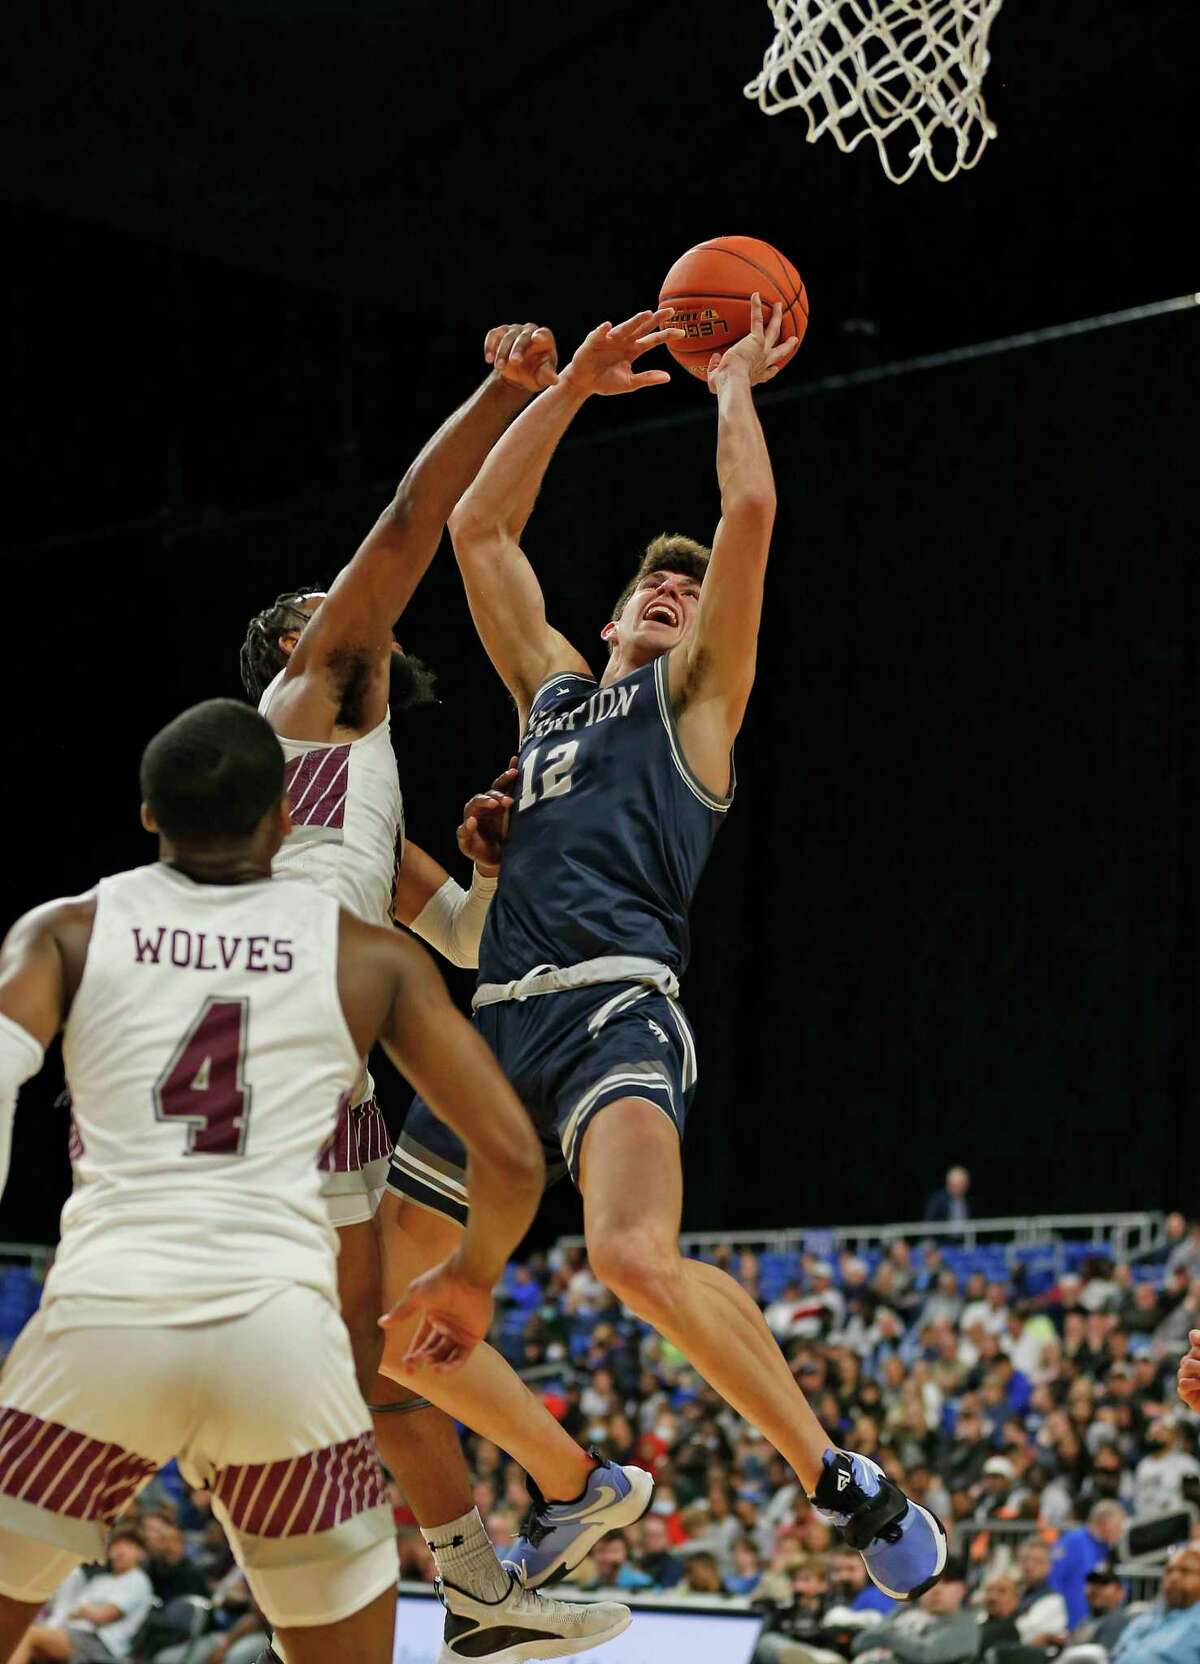 Boerne Champion guard Braxton Burdick (12) shoots over Mansfield Timberview defenders. Boerne Champion defeated by Mansfield Timberview 55-43 in Class 5A state semifinal l on Thursday, March 10, 2022 at the Alamodome.